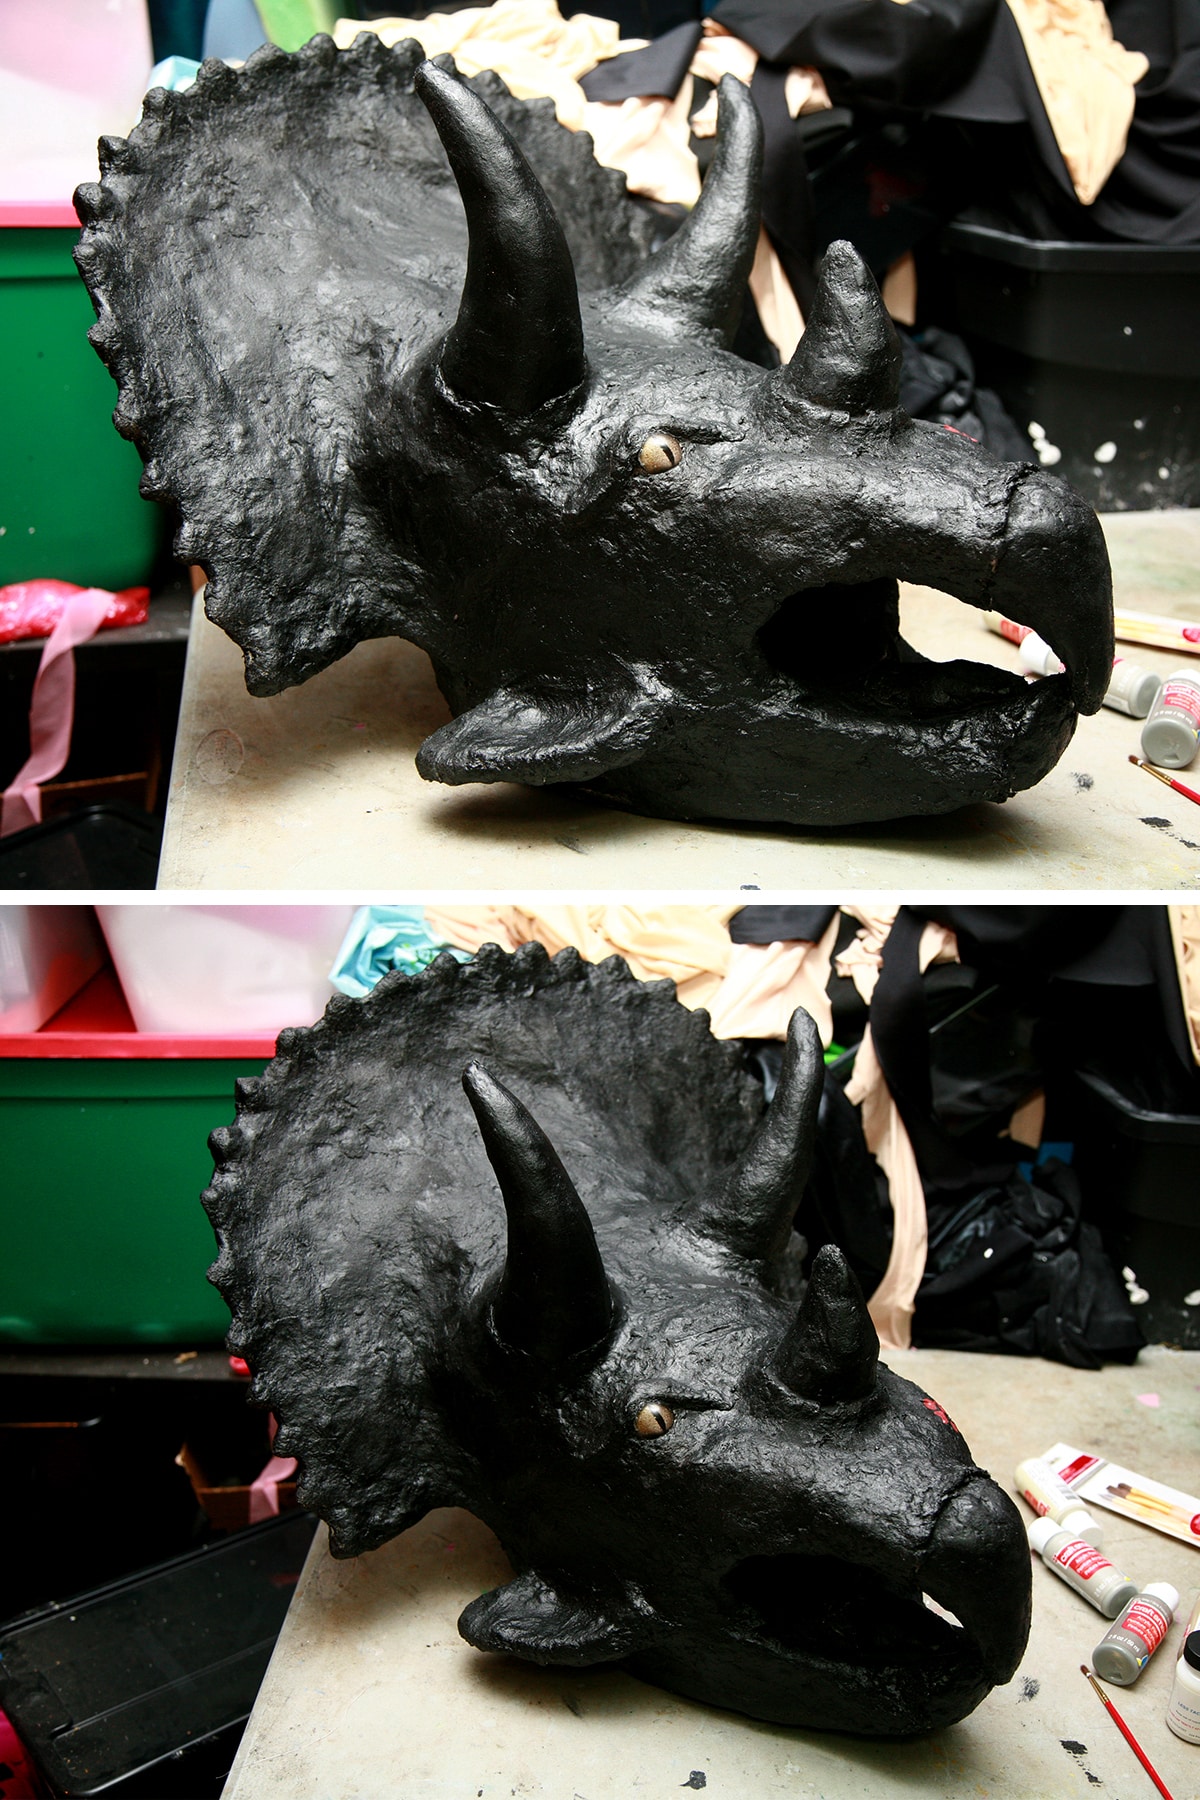 2 views of the helmet mask, after being coated with black plasti-dip.